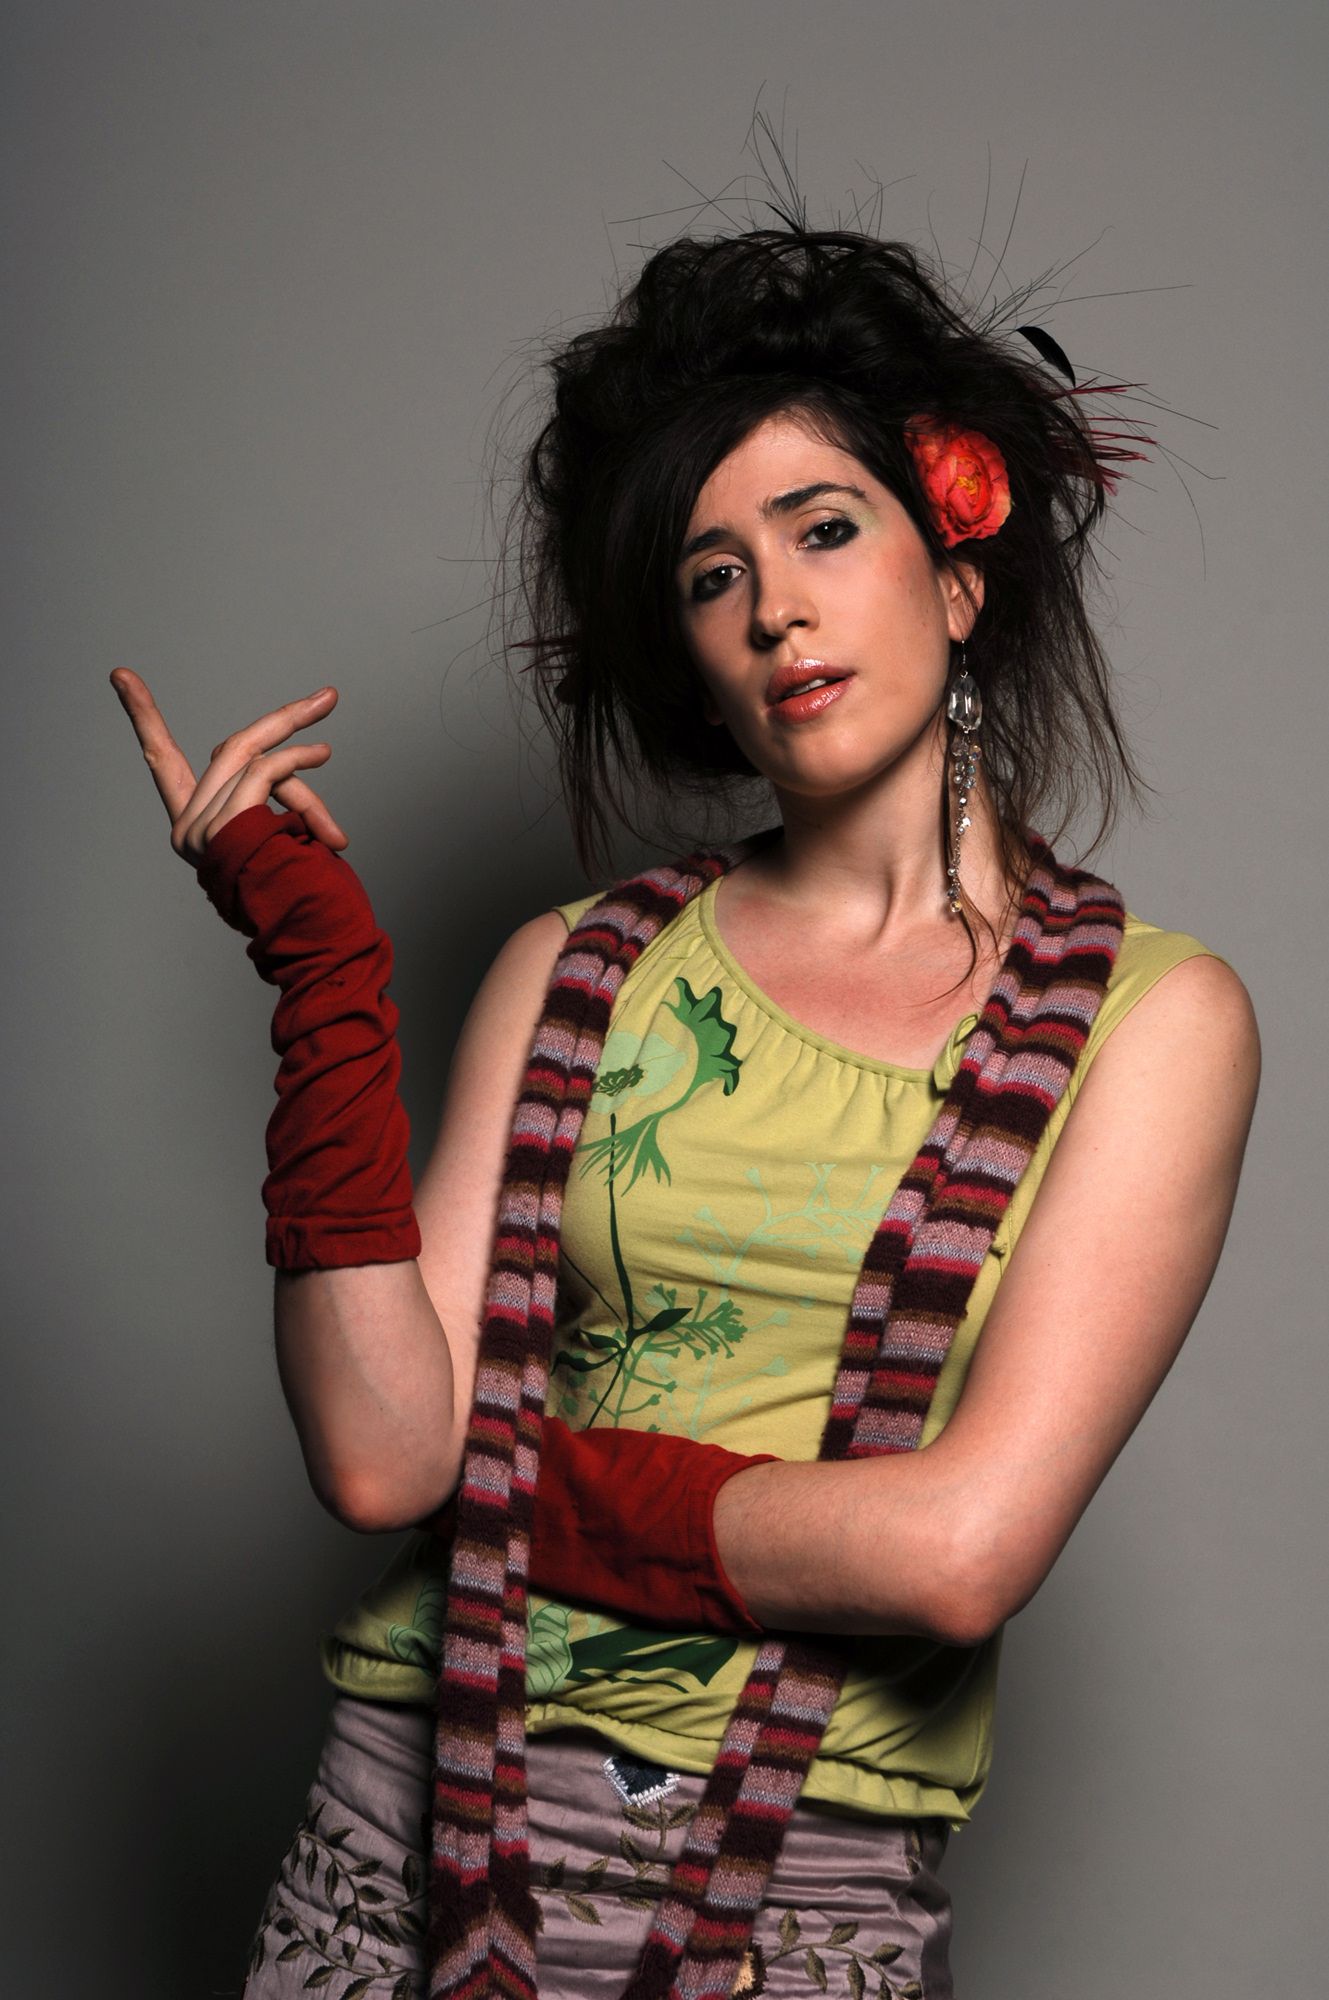 Imogen Heap's 'Hide-and-Seek' Is THE Song of Teen Angst — Again